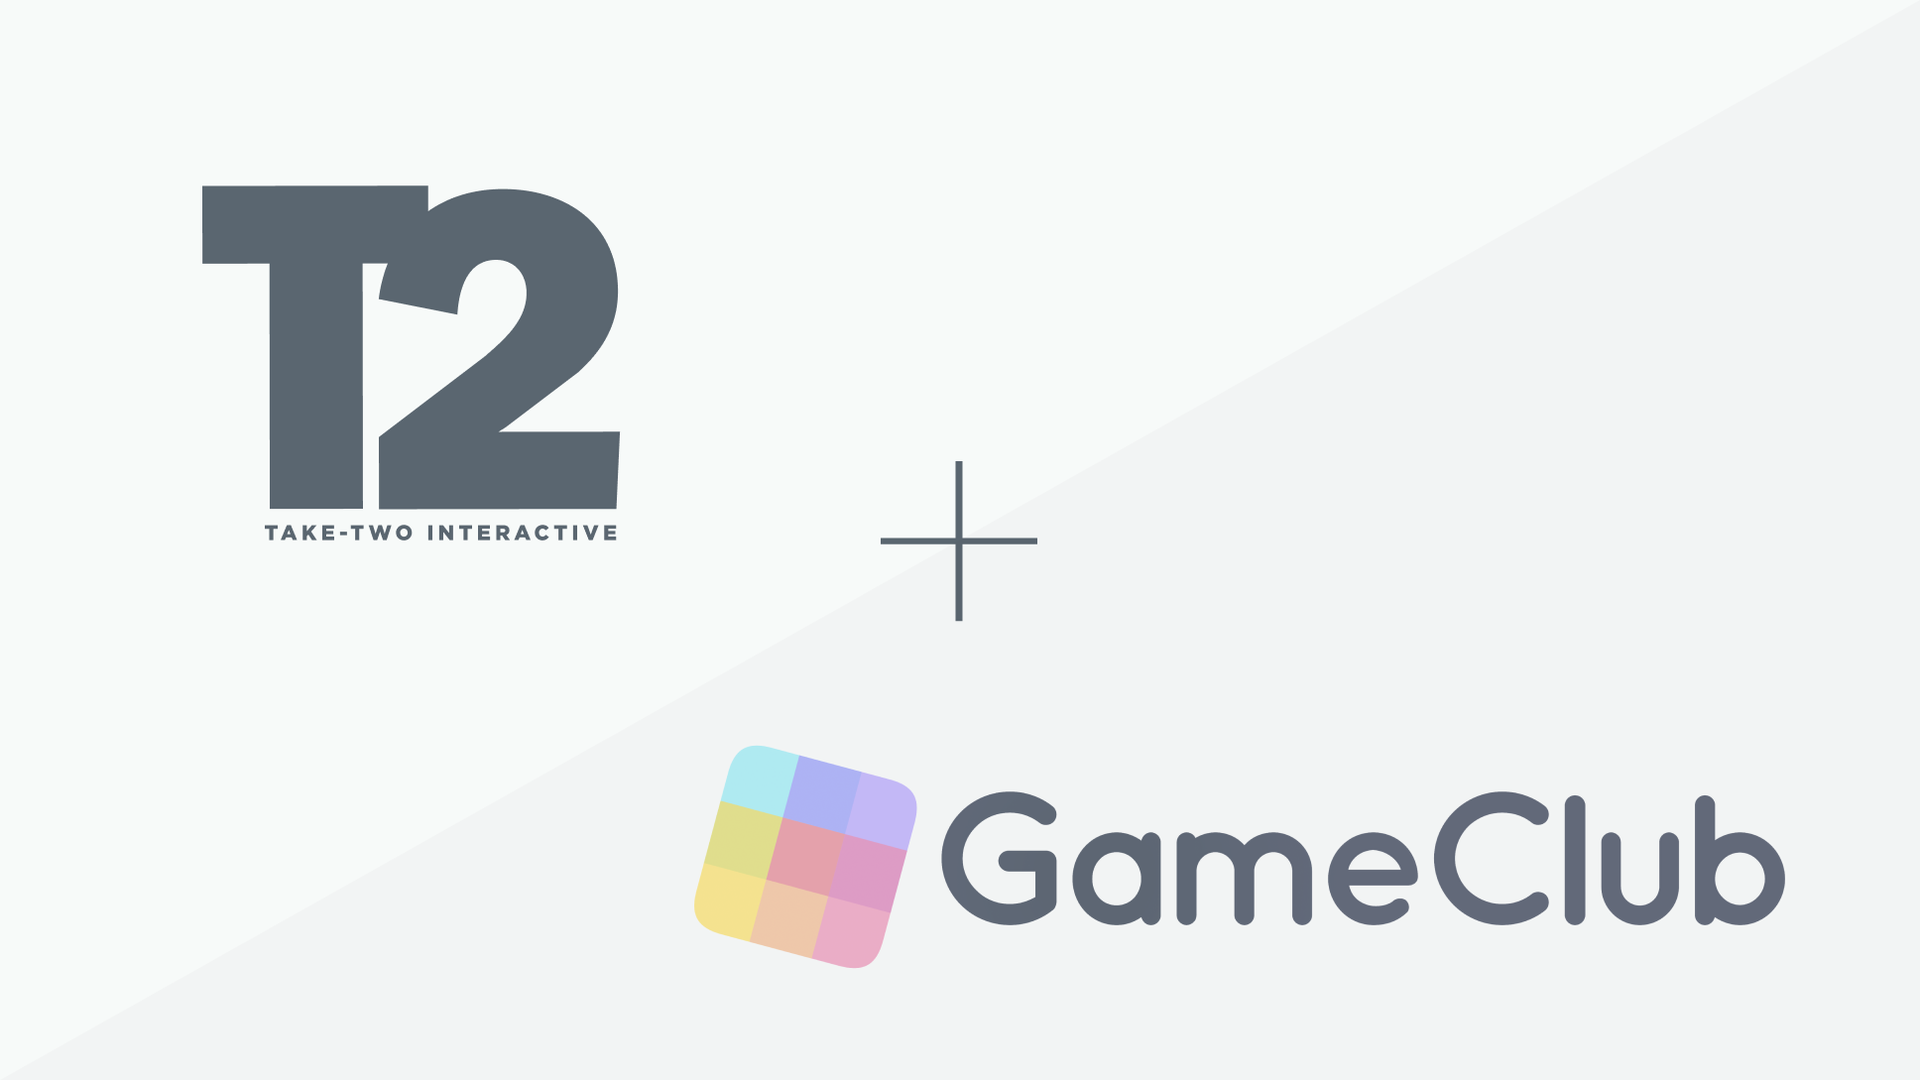 now.gg, Inc. announces strategic investment from MEGAZONECLOUD to bring  mobile cloud play to game developers